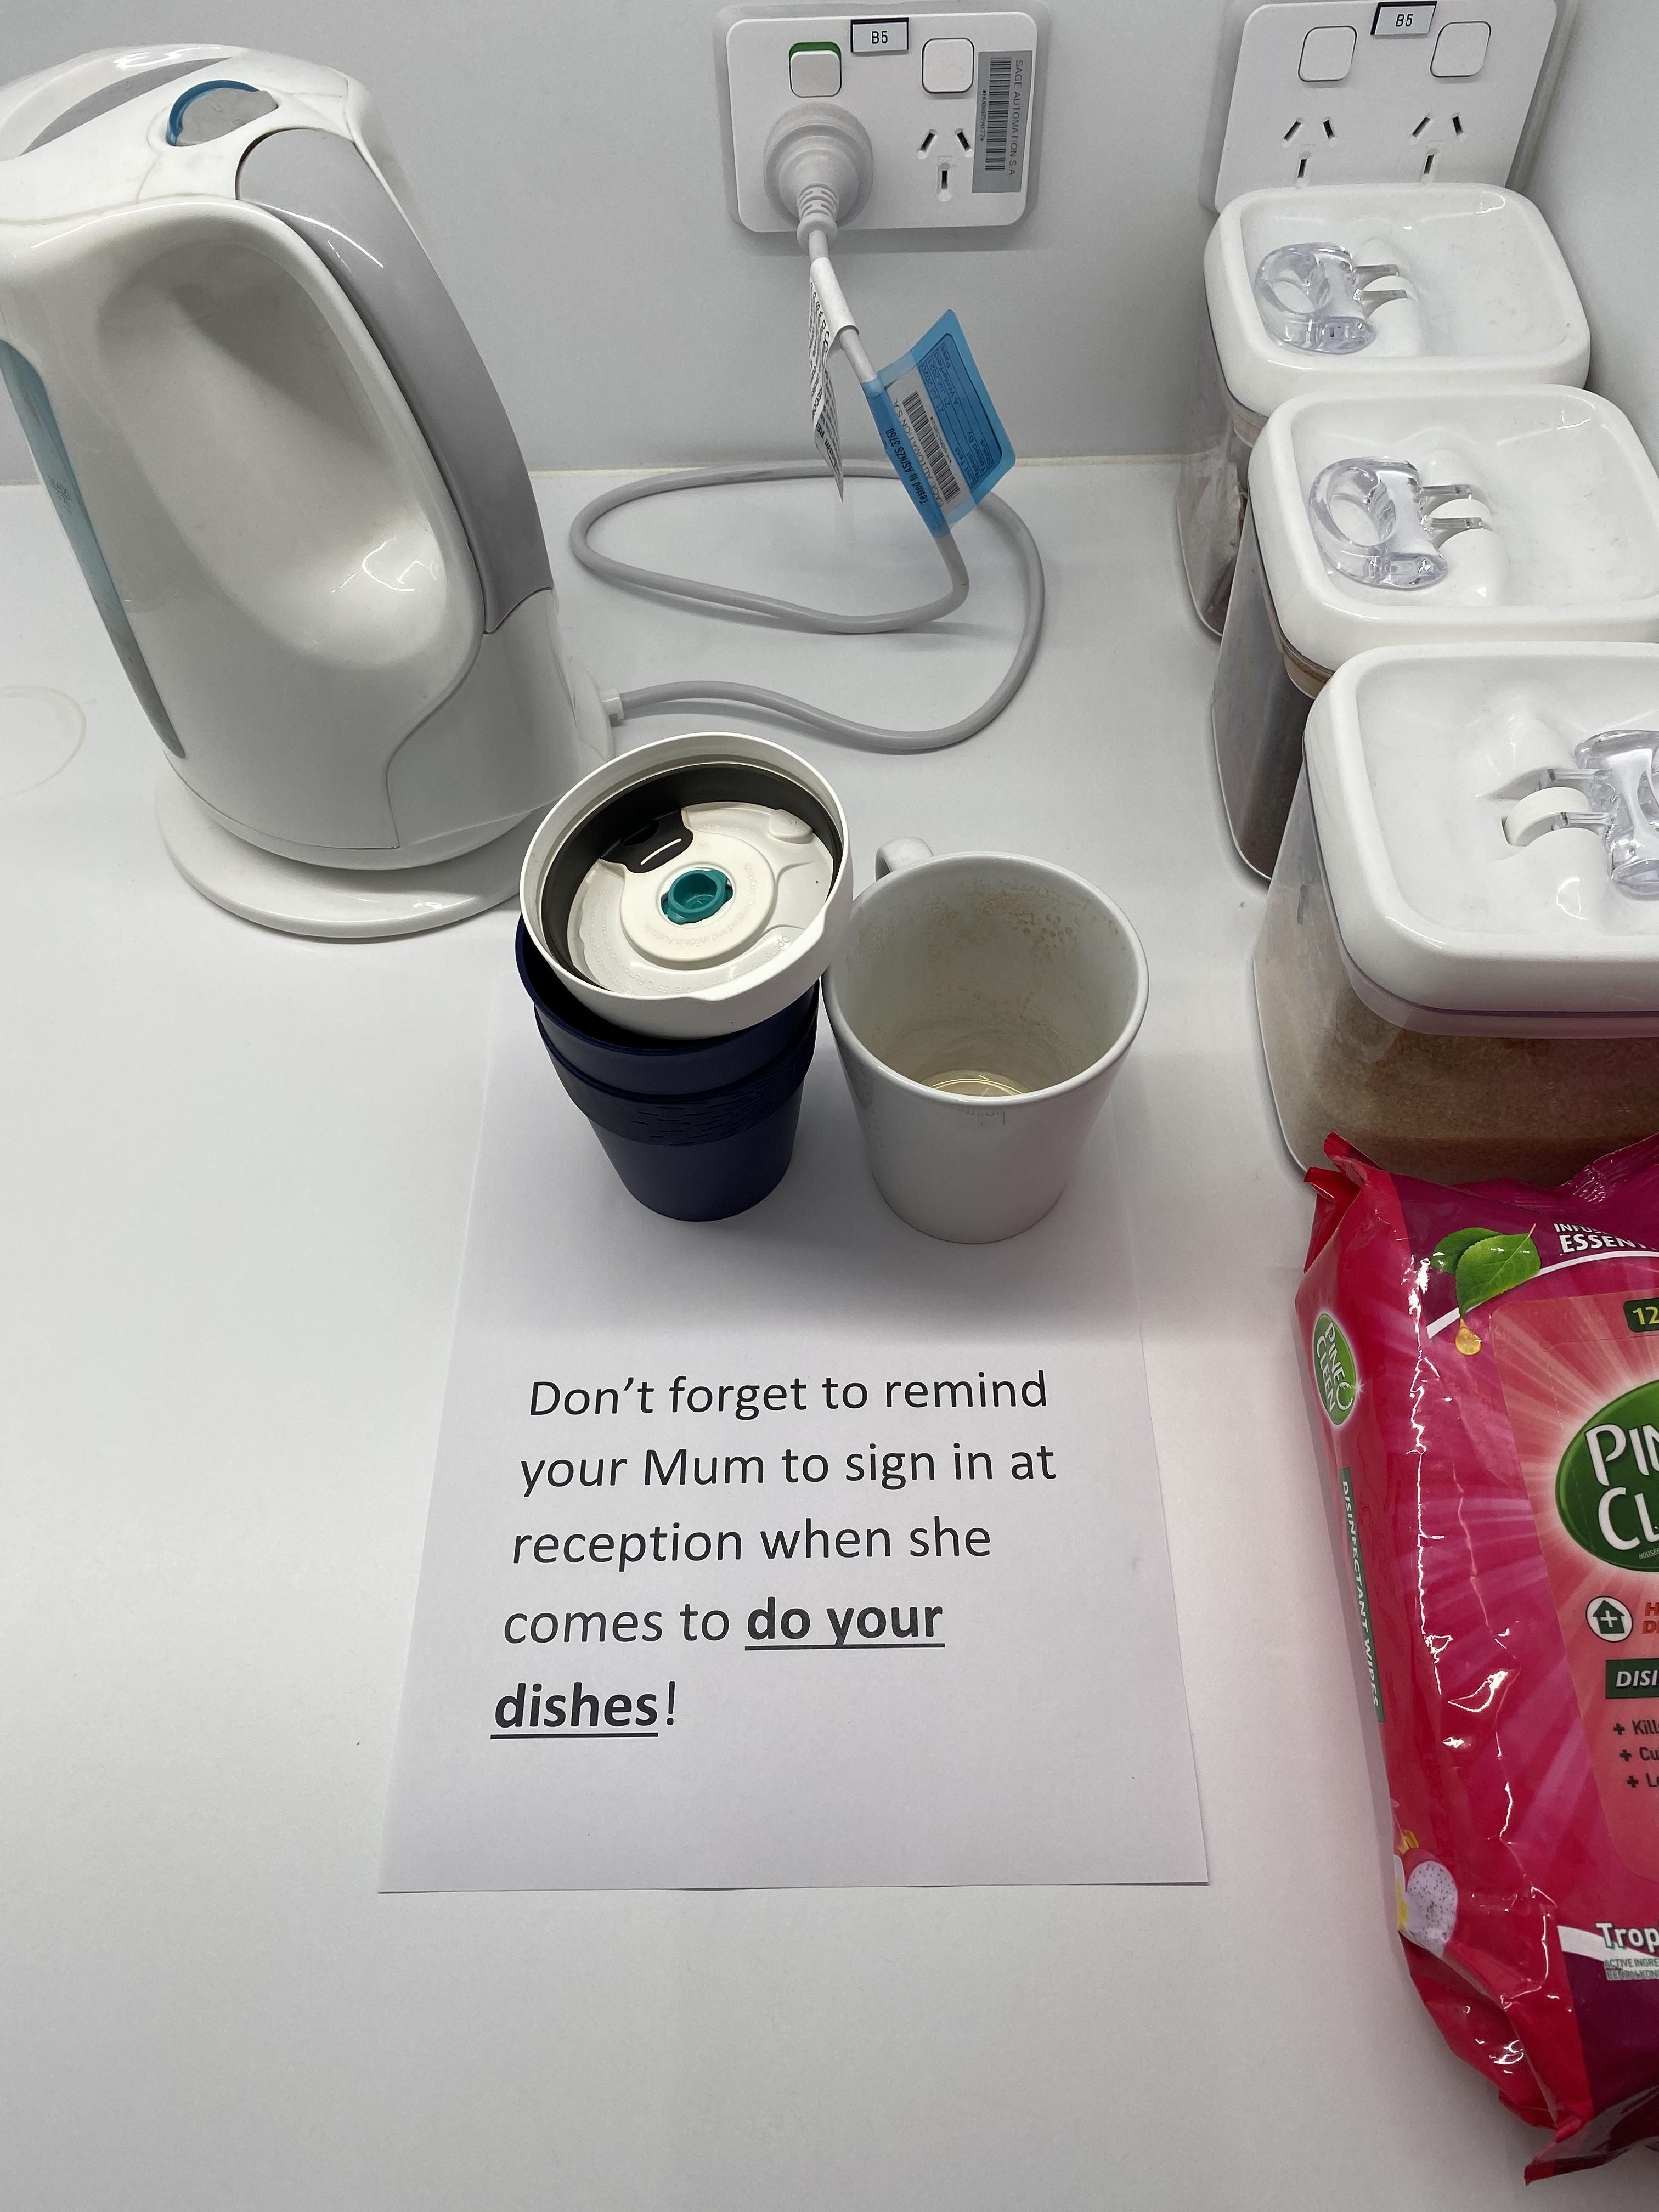 Work place passive aggression 101